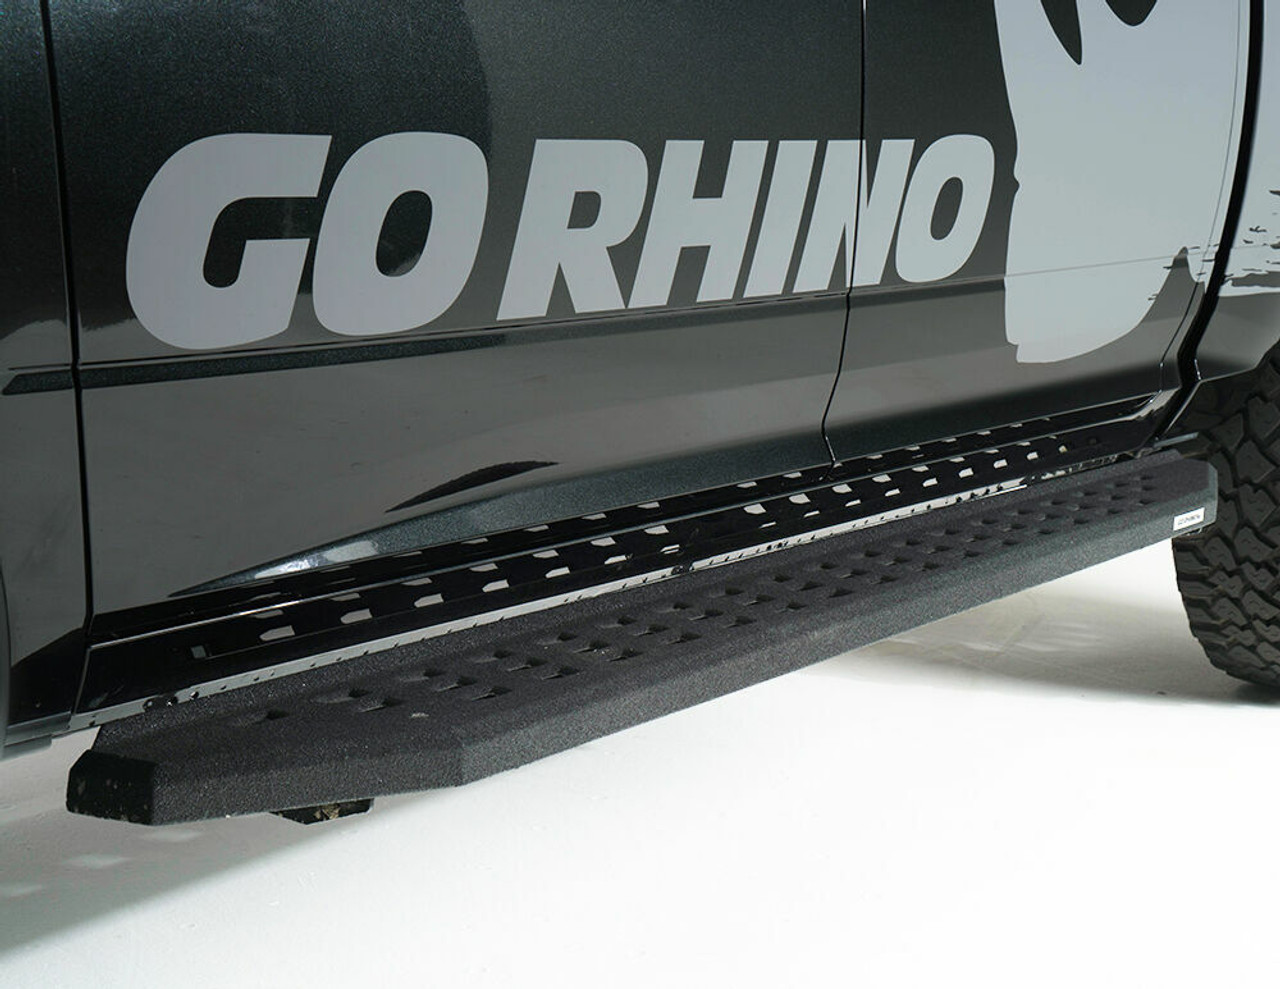 Go Rhino 6940478720PC Chevy, Silverado 1500 LD (Classic), 2014-2019, RB20 Running boards - Kit: 2 pair RB20 Drop Steps, Galvanized Steel, Textured black, 69400087PC RB20 + 6940475 RB Brackets + (2) 69420000PC Drop Down Step, Classic Body Only